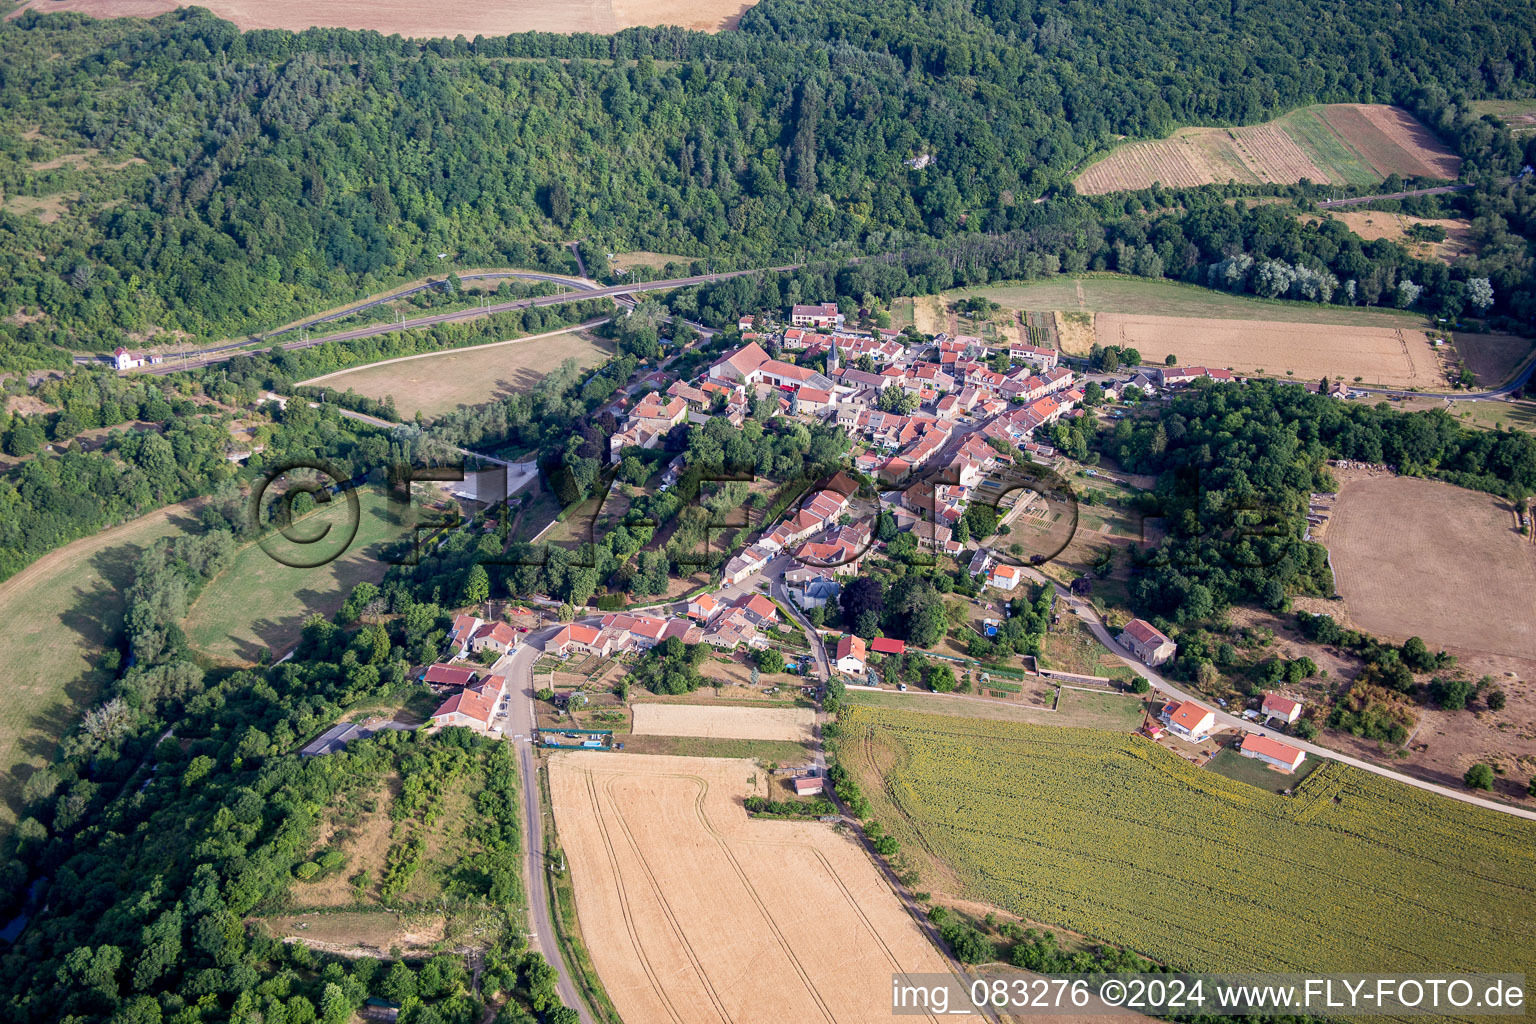 Aerial view of Village - view on the edge of agricultural fields and farmland in Jaulny in Grand Est, France